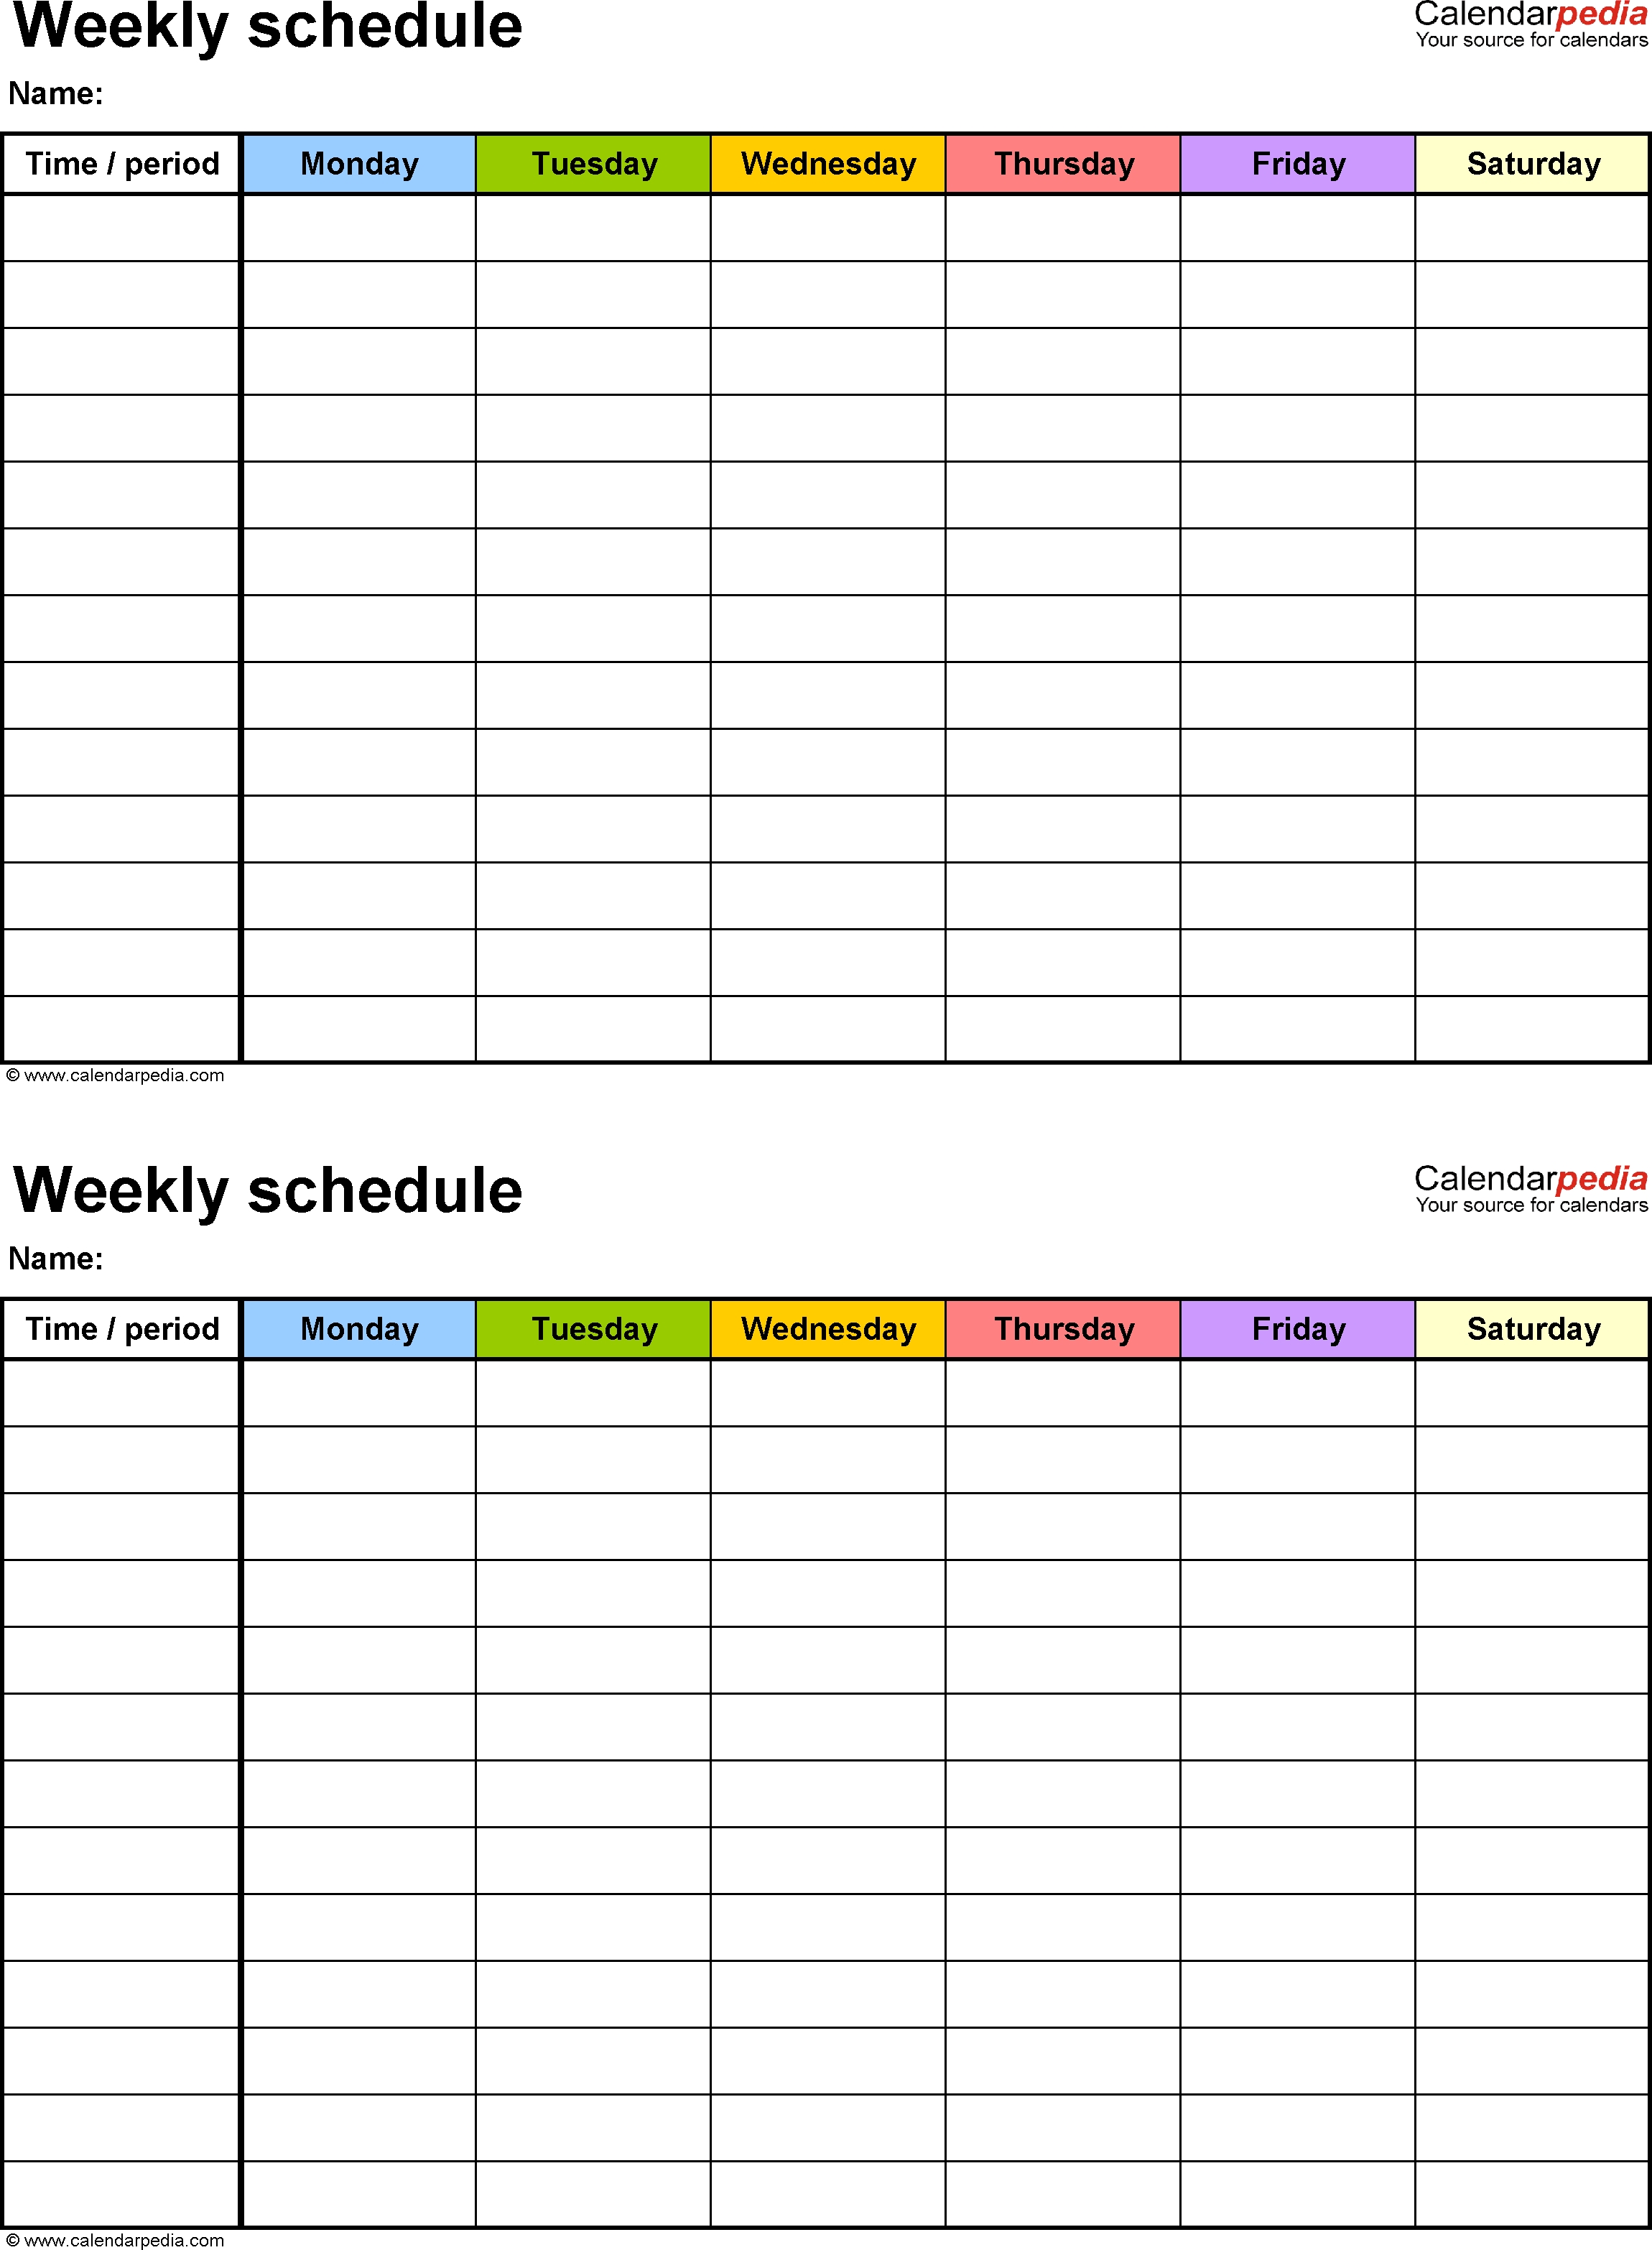 Free Weekly Schedule Templates For Word - 18 Templates Free 2 Week Calendar Template